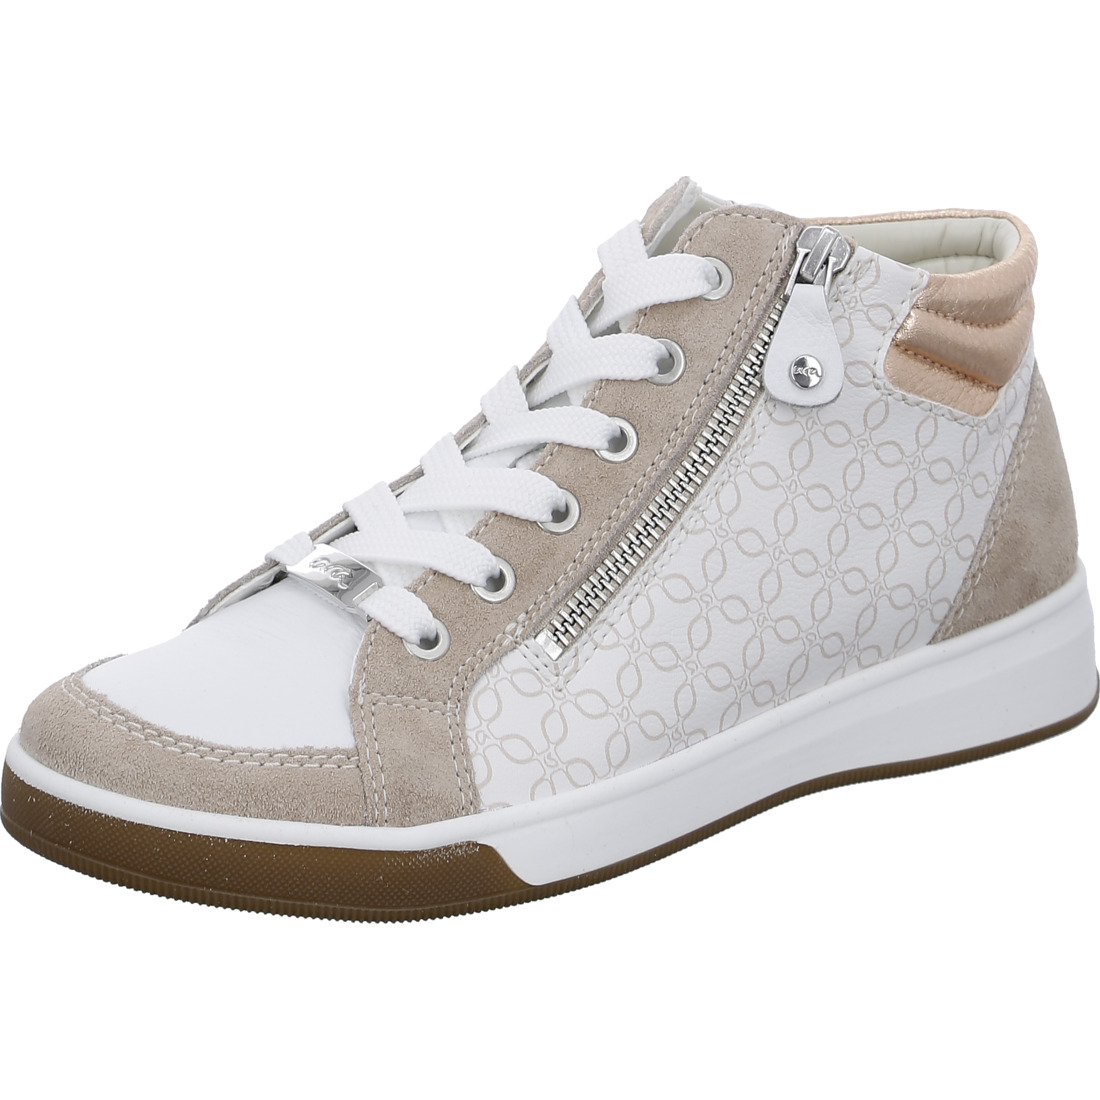 Sneakers*Ara Shoes Sneakers High top Baskets Rom sable